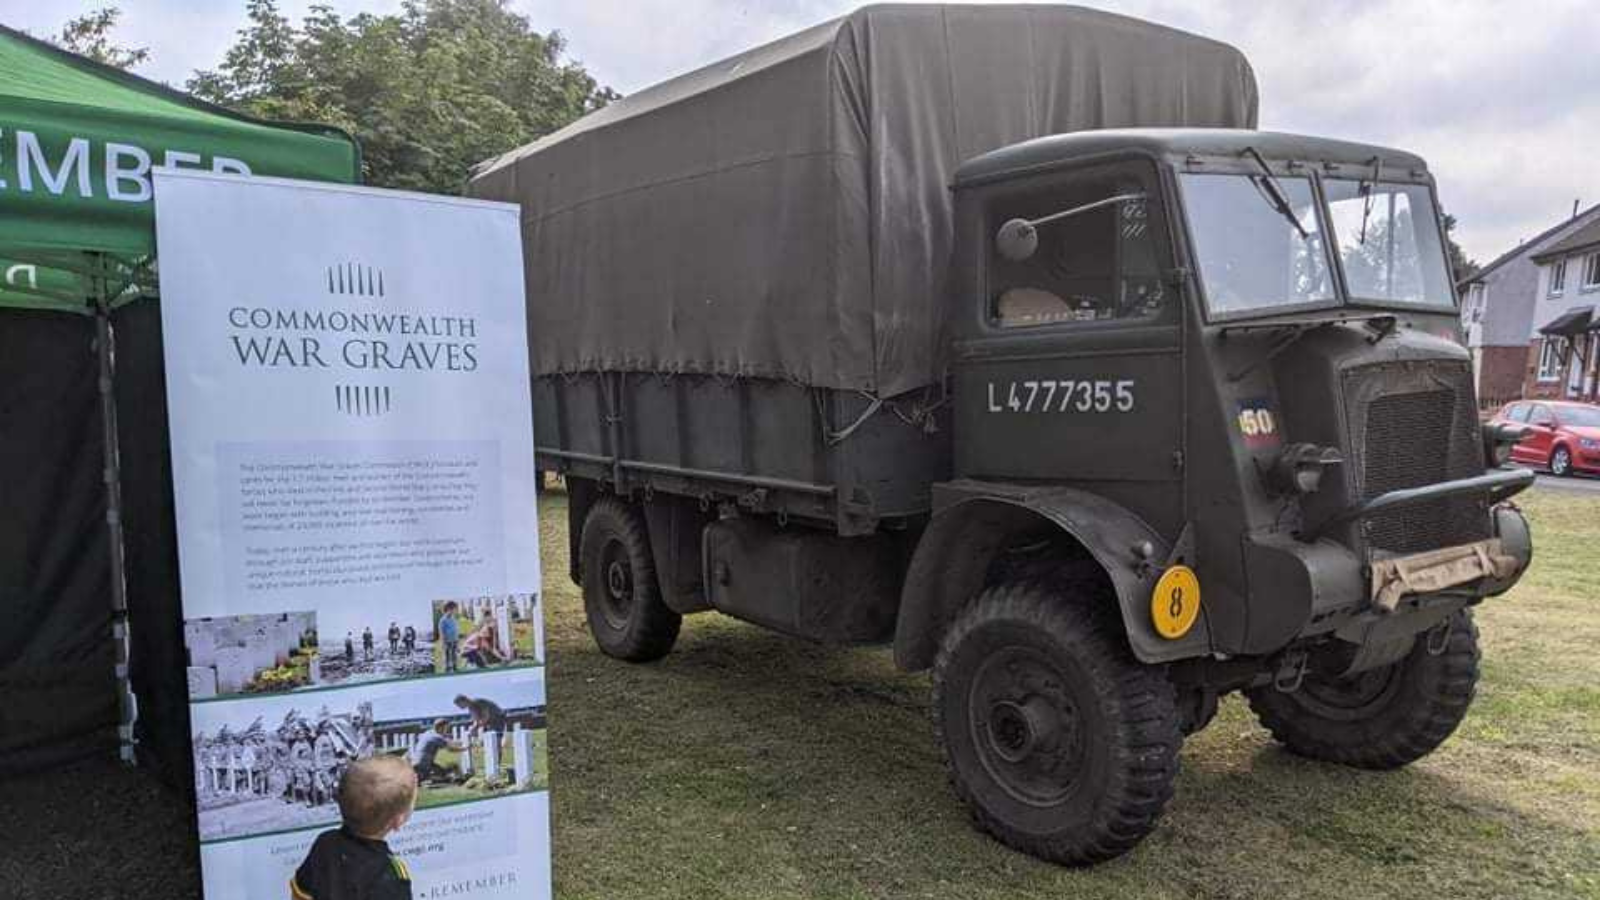 Image of a military vehicle with an information banner sign next to it telling you about the Commonwealth War Graves.